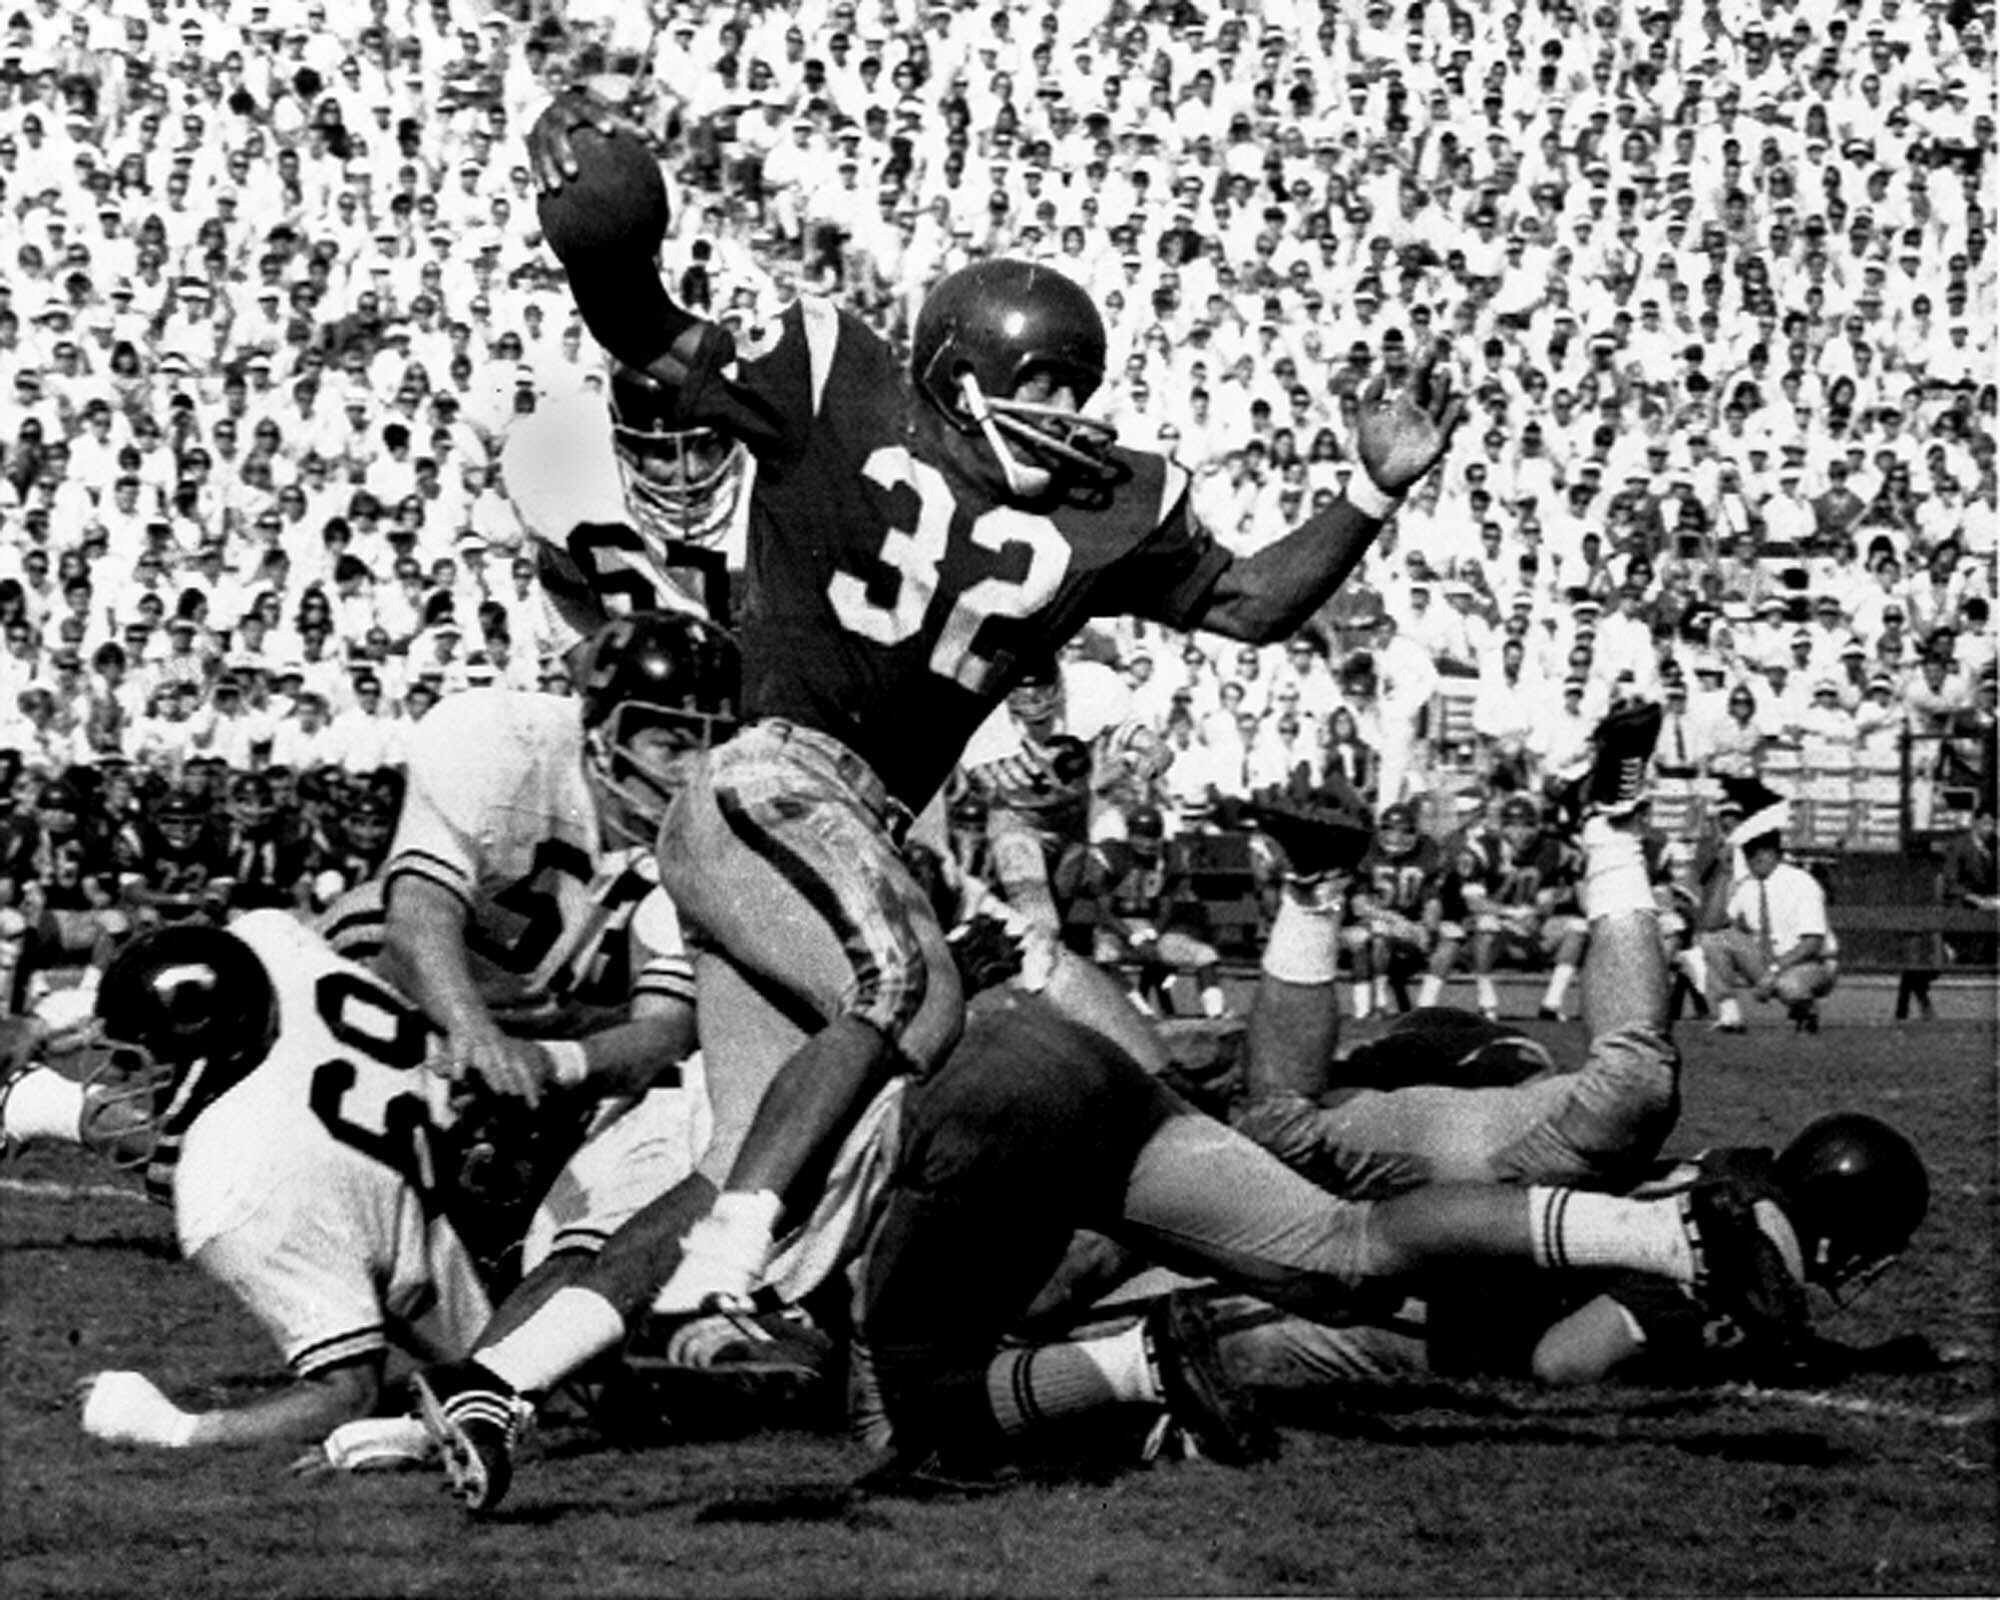 PHOTO: In this Nov. 9, 1968 file photo, Southern California's O.J. Simpson runs against California during a college football game in Los Angeles.